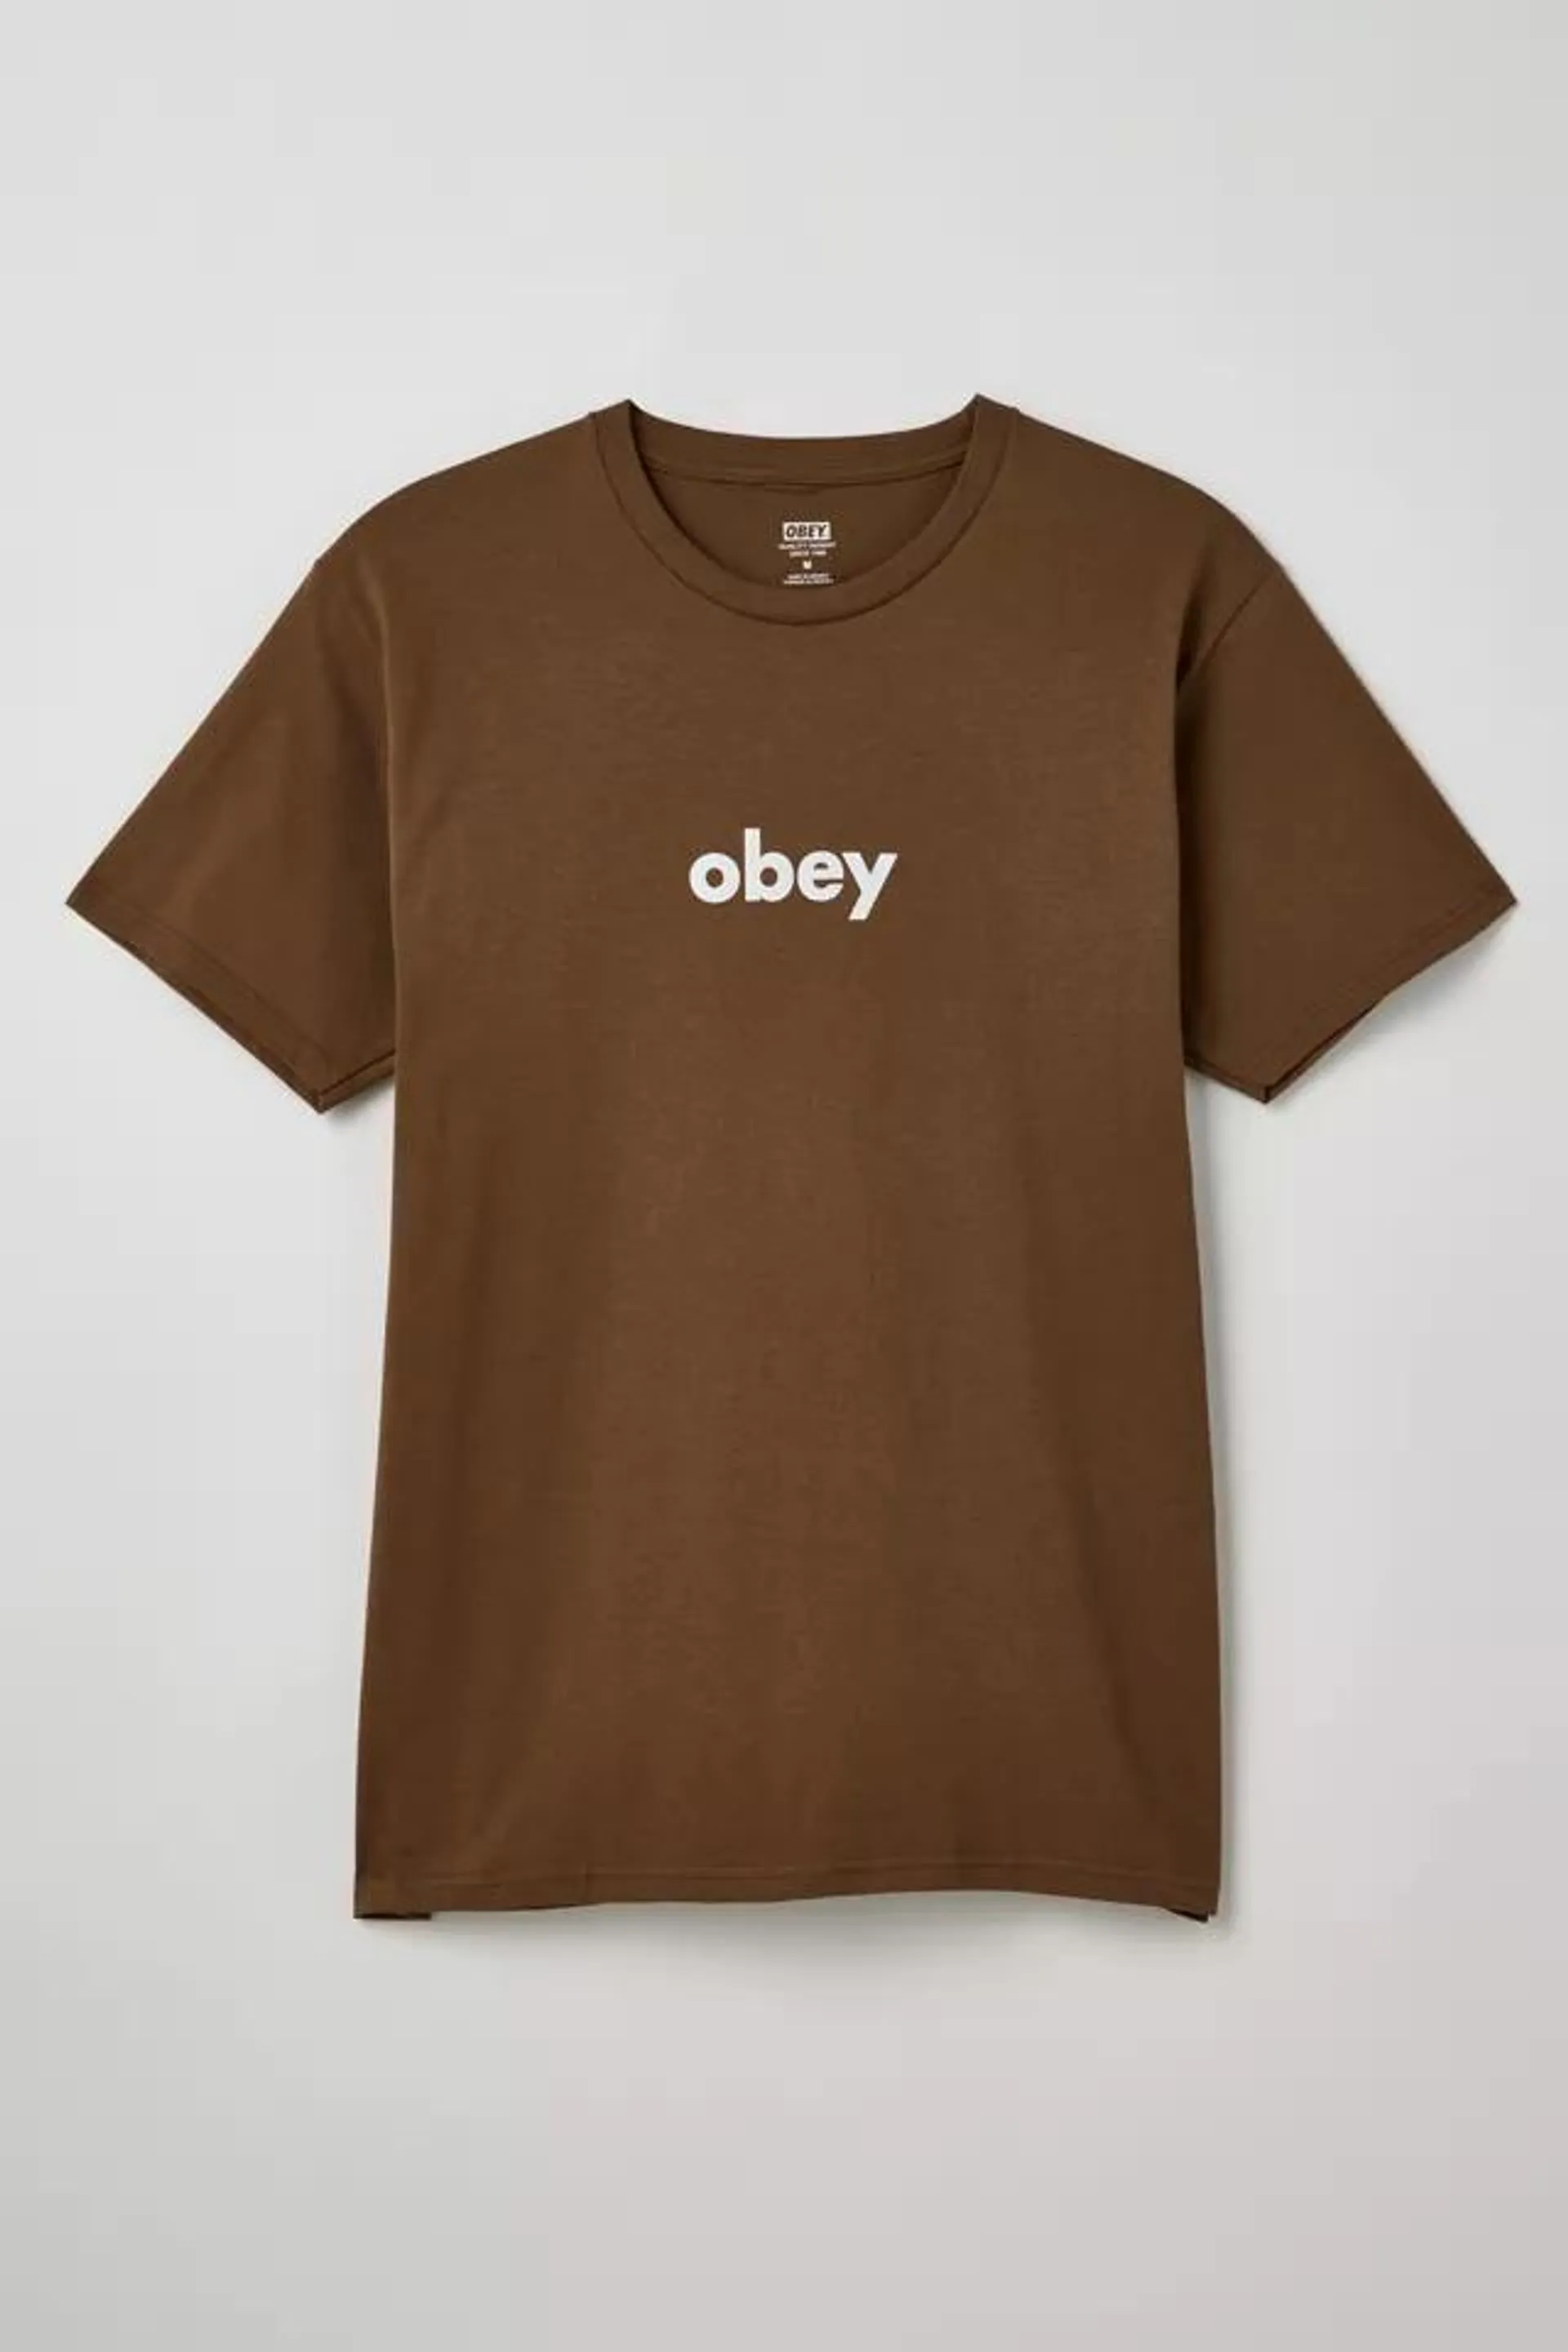 OBEY Lowercase Tee